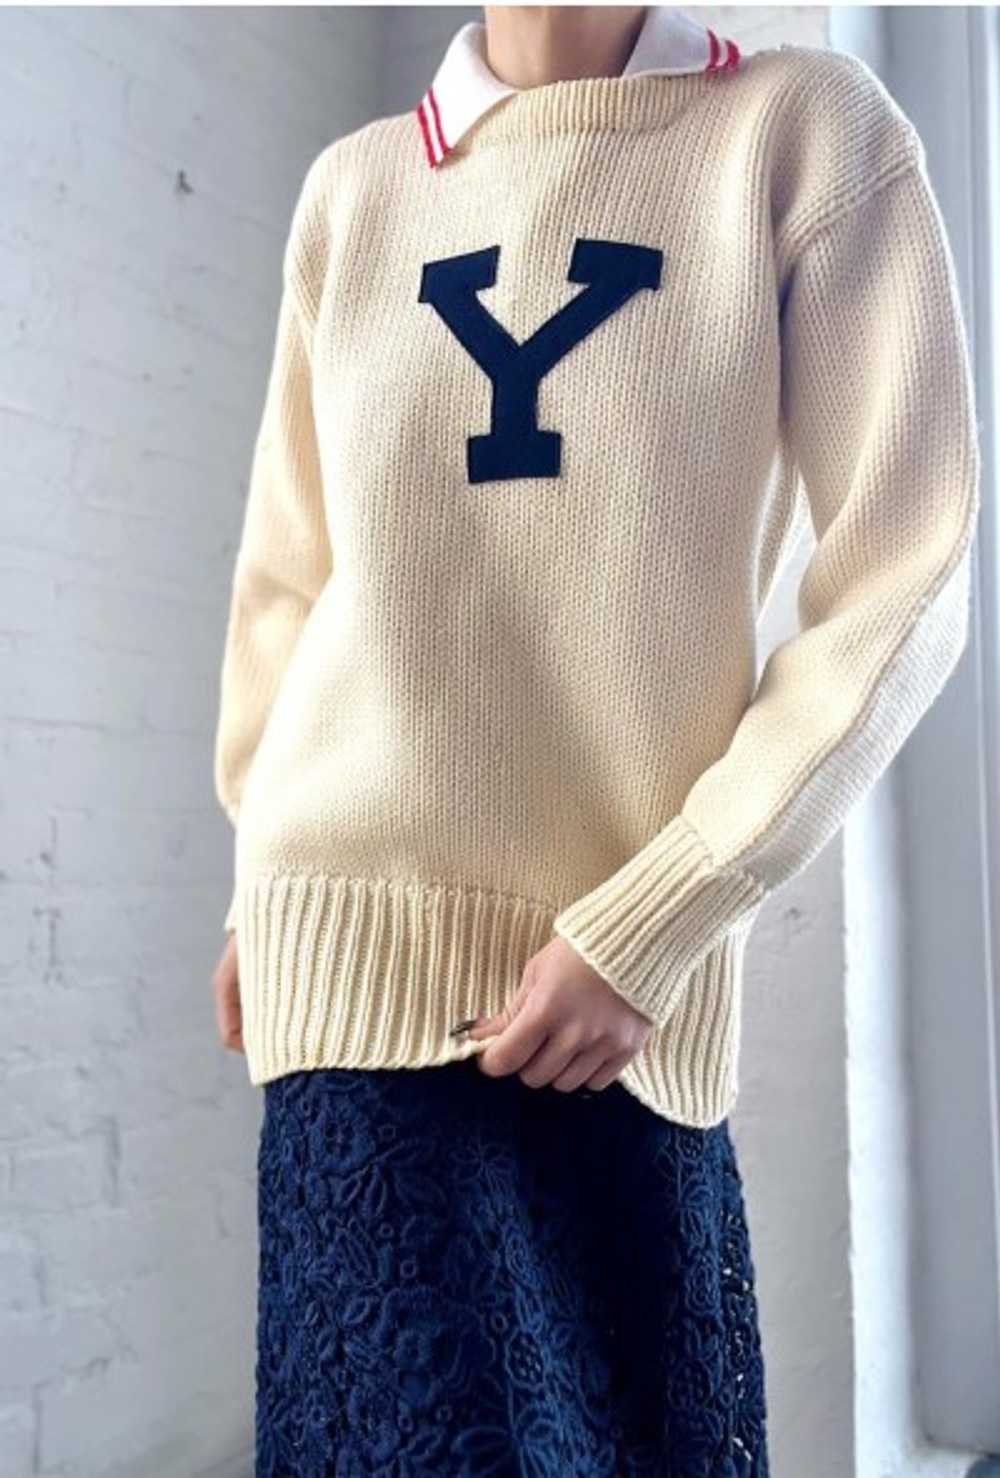 authentic Yale 40s wool knit letterman sweater - image 3